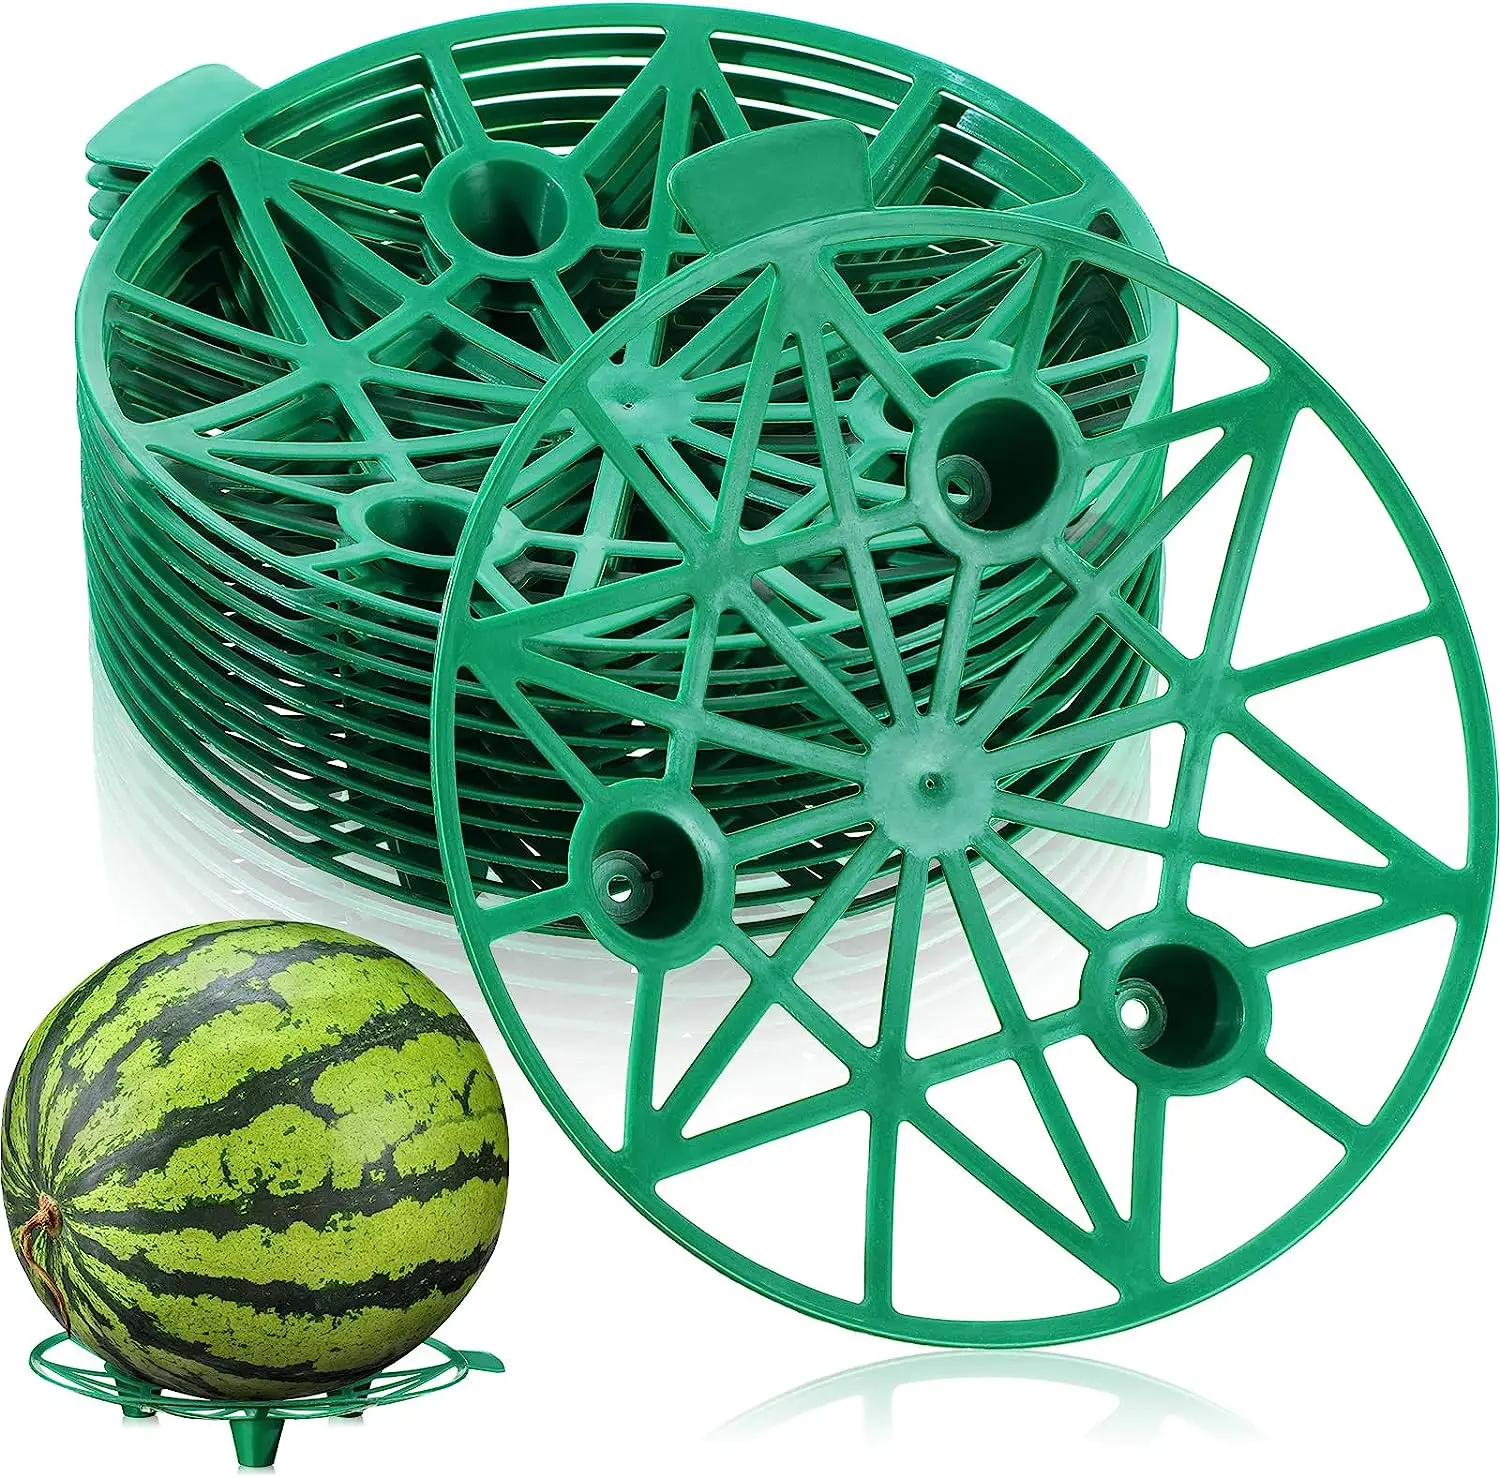 

5/10/20Pcs Melon Cradle Pumpkin Support Strawberry Supports Holder Set Protect Watermelons From Ground Rot Holds Up to 8 lbs